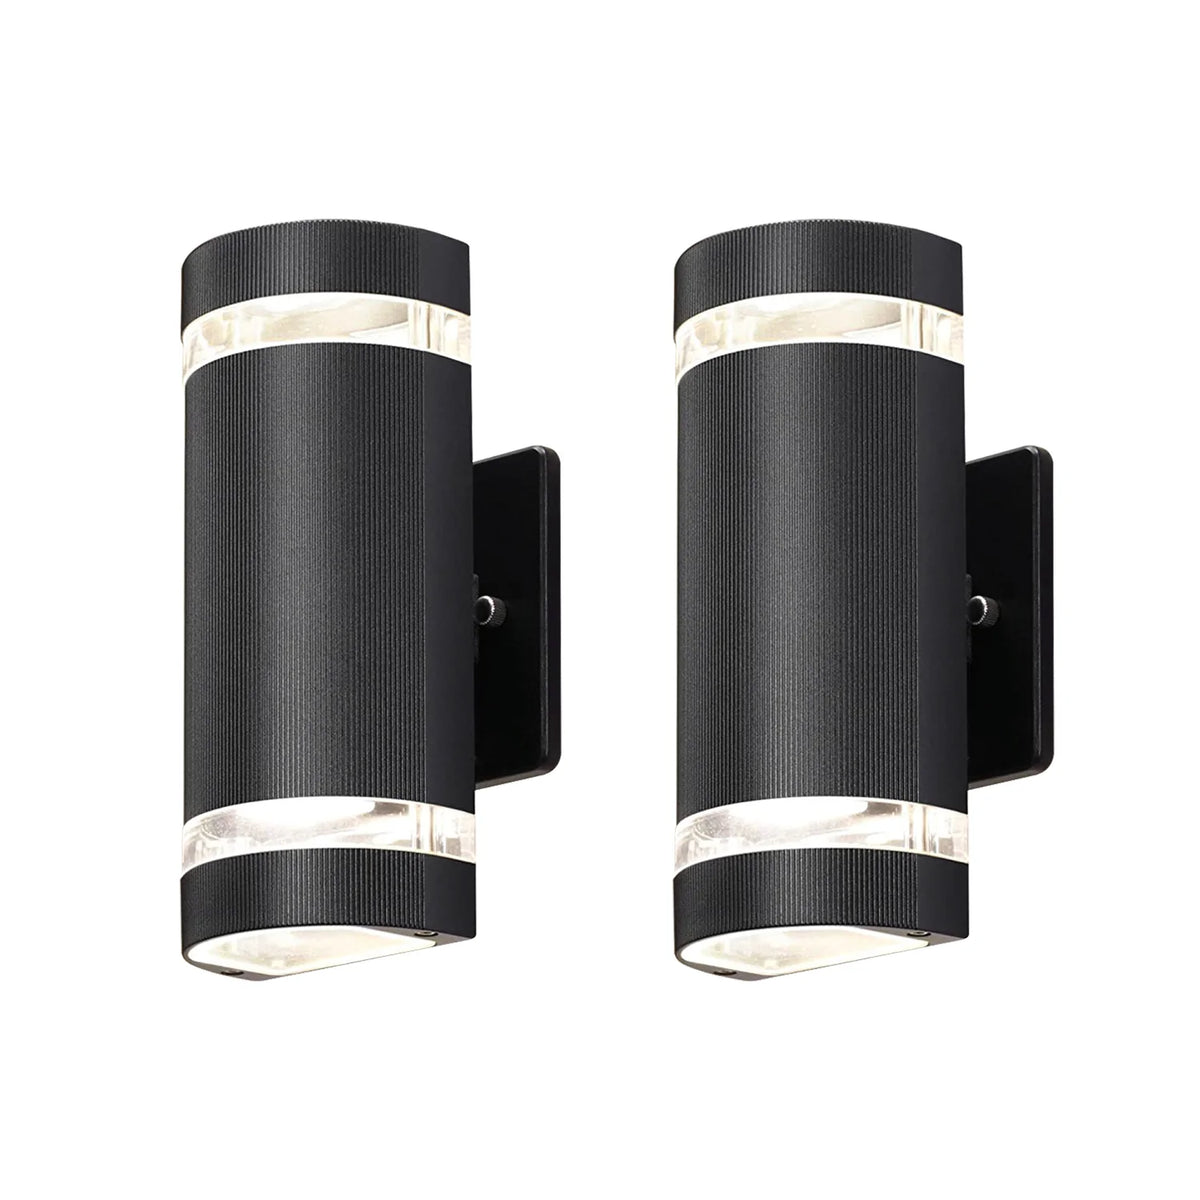 Up and Down Outdoor Wall Light, Aluminum, Waterproof, 2 x LED GU10 Bulb, 5W, 650LM, 3000K (2 PACK)